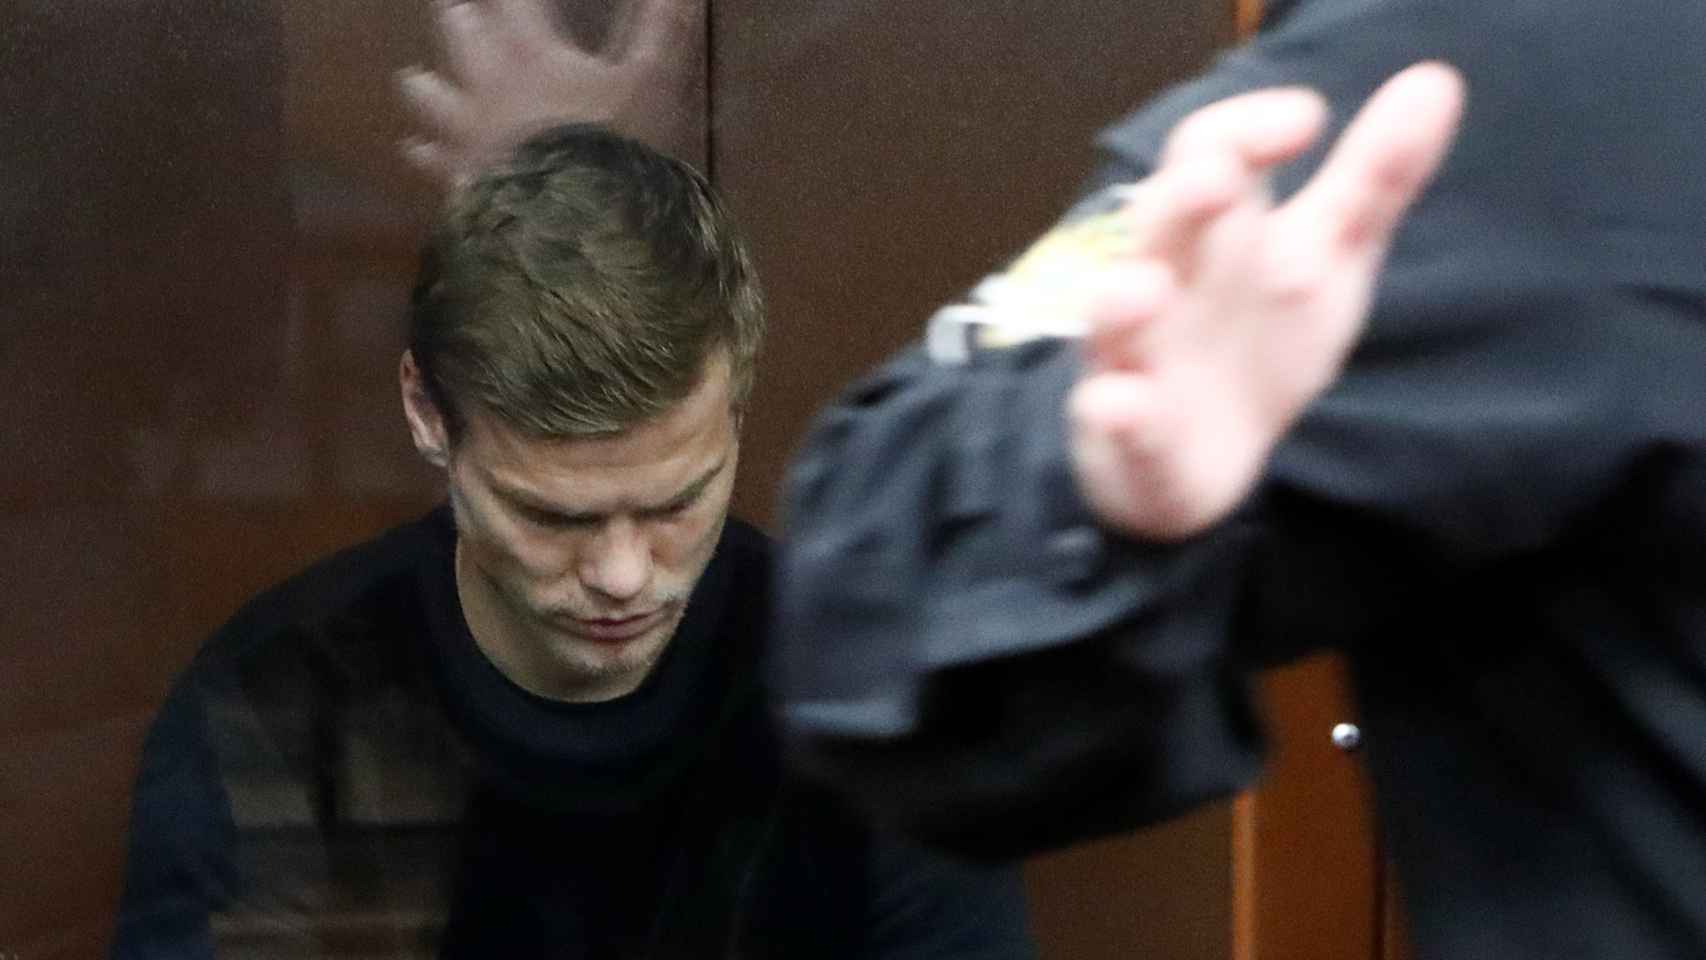 Russian soccer player Kokorin attends a court hearing in Moscow